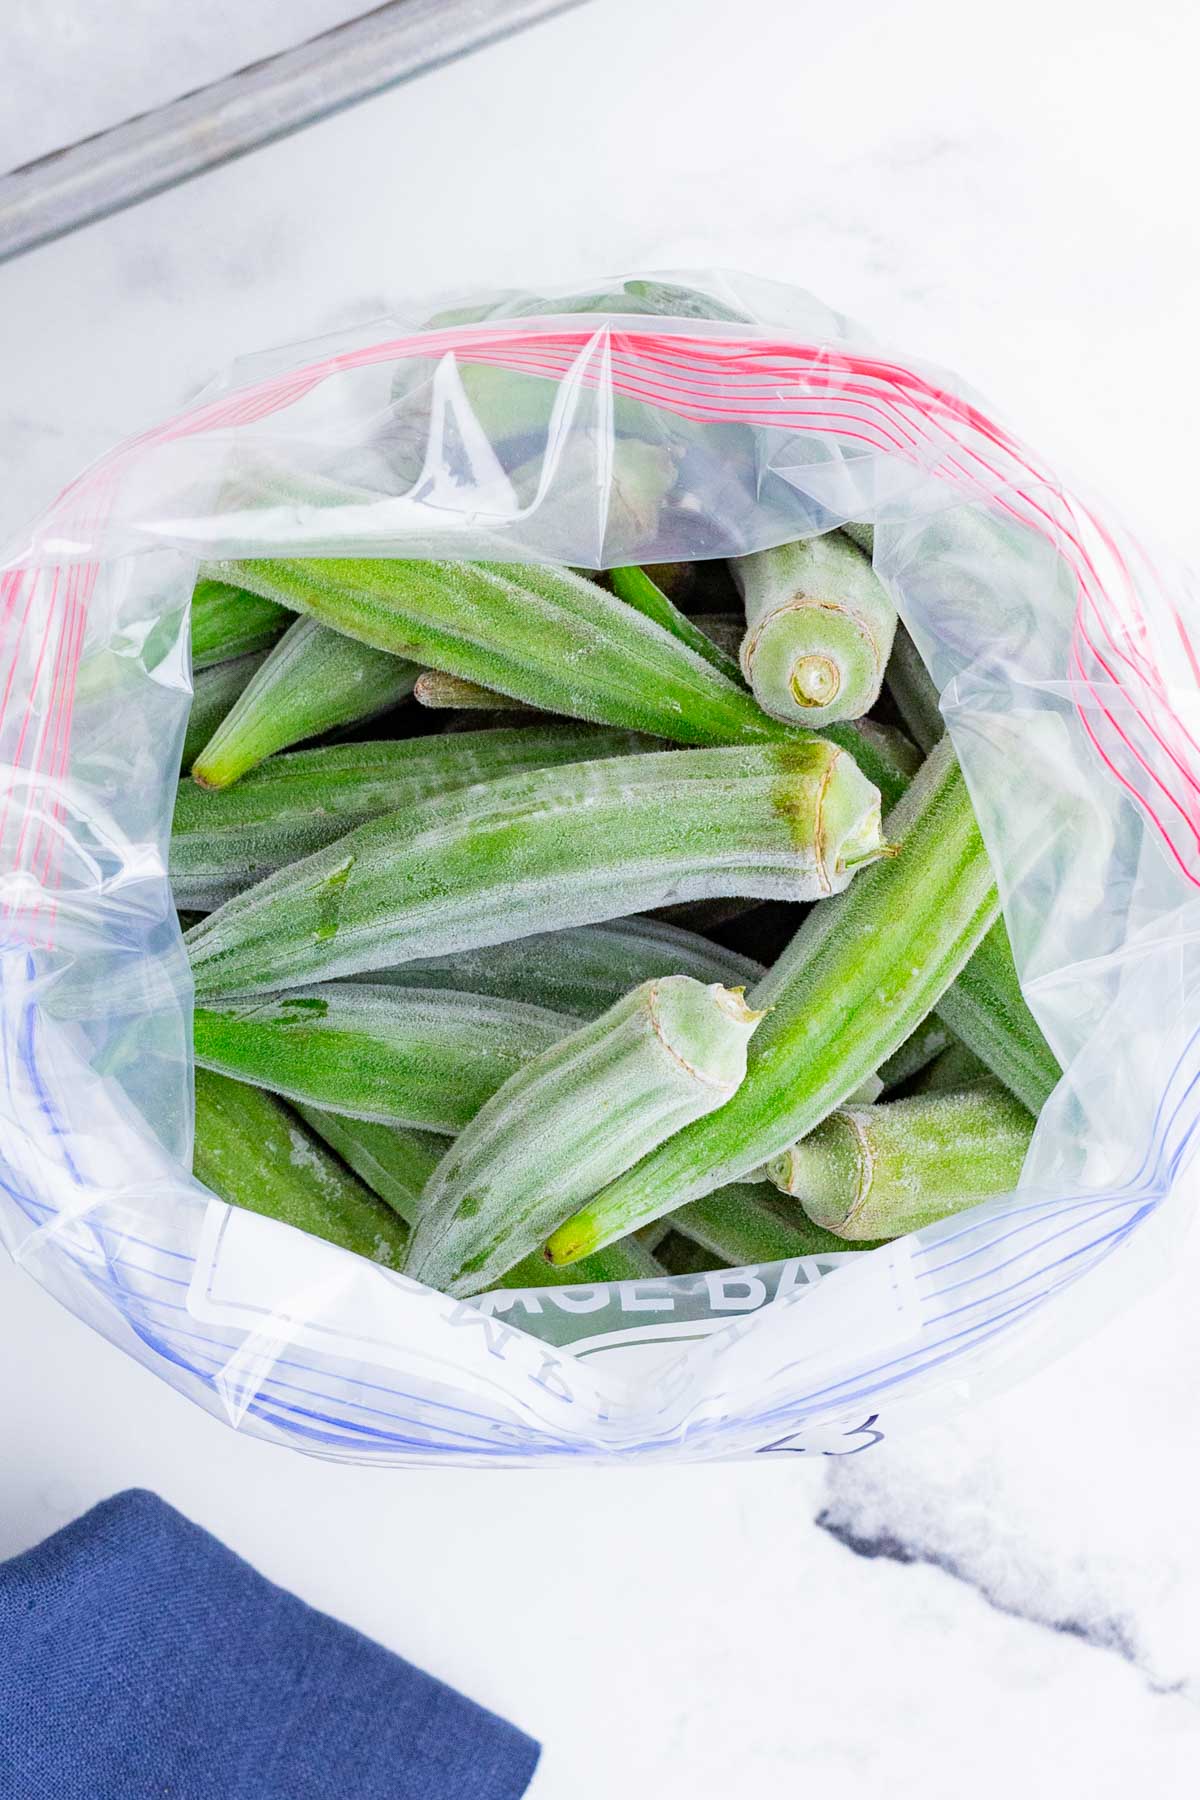 Freeze okra so you have this veggie ready to use year-round.